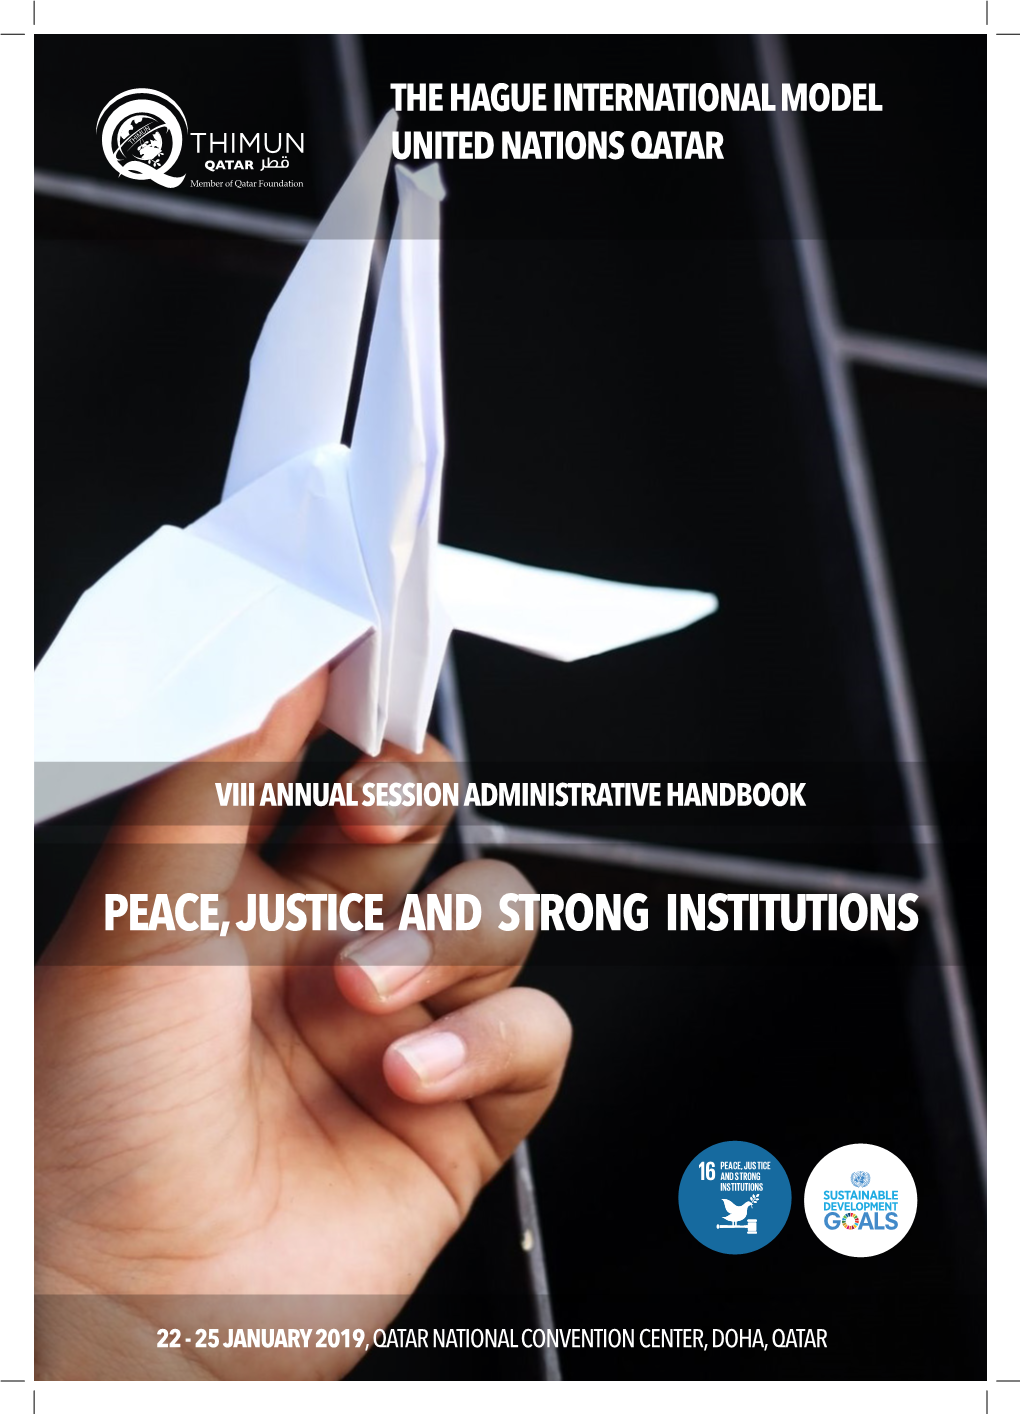 Peace, Justice and Strong Institutions